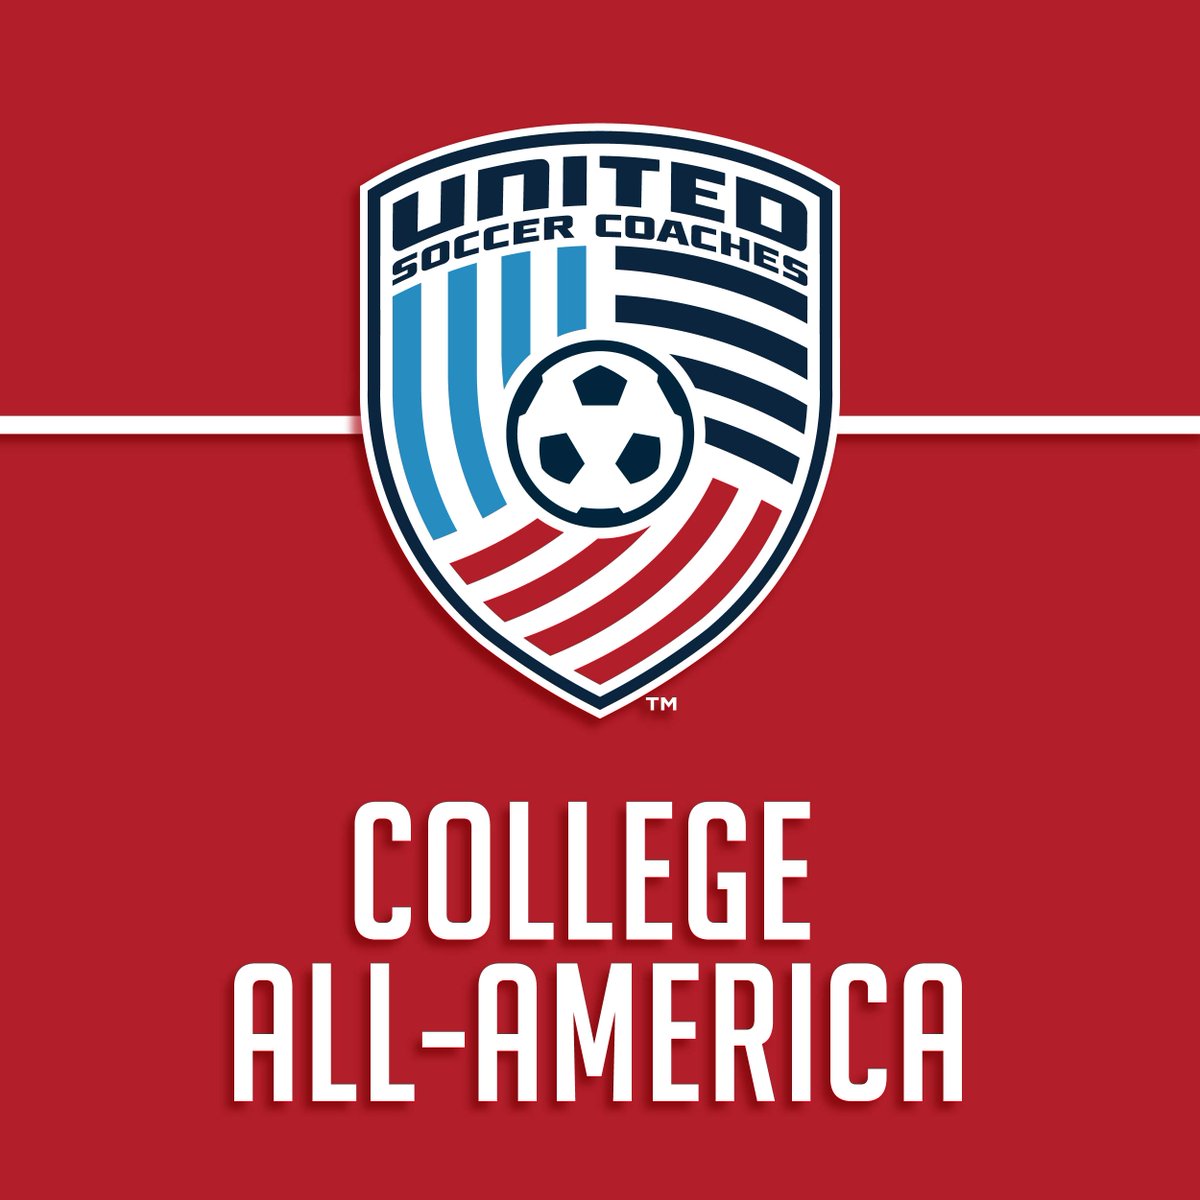 KUNTZ AND ZAMBRANO NAMED TO UNITED SOCCER COACHES ALL-AMERICA TEAM